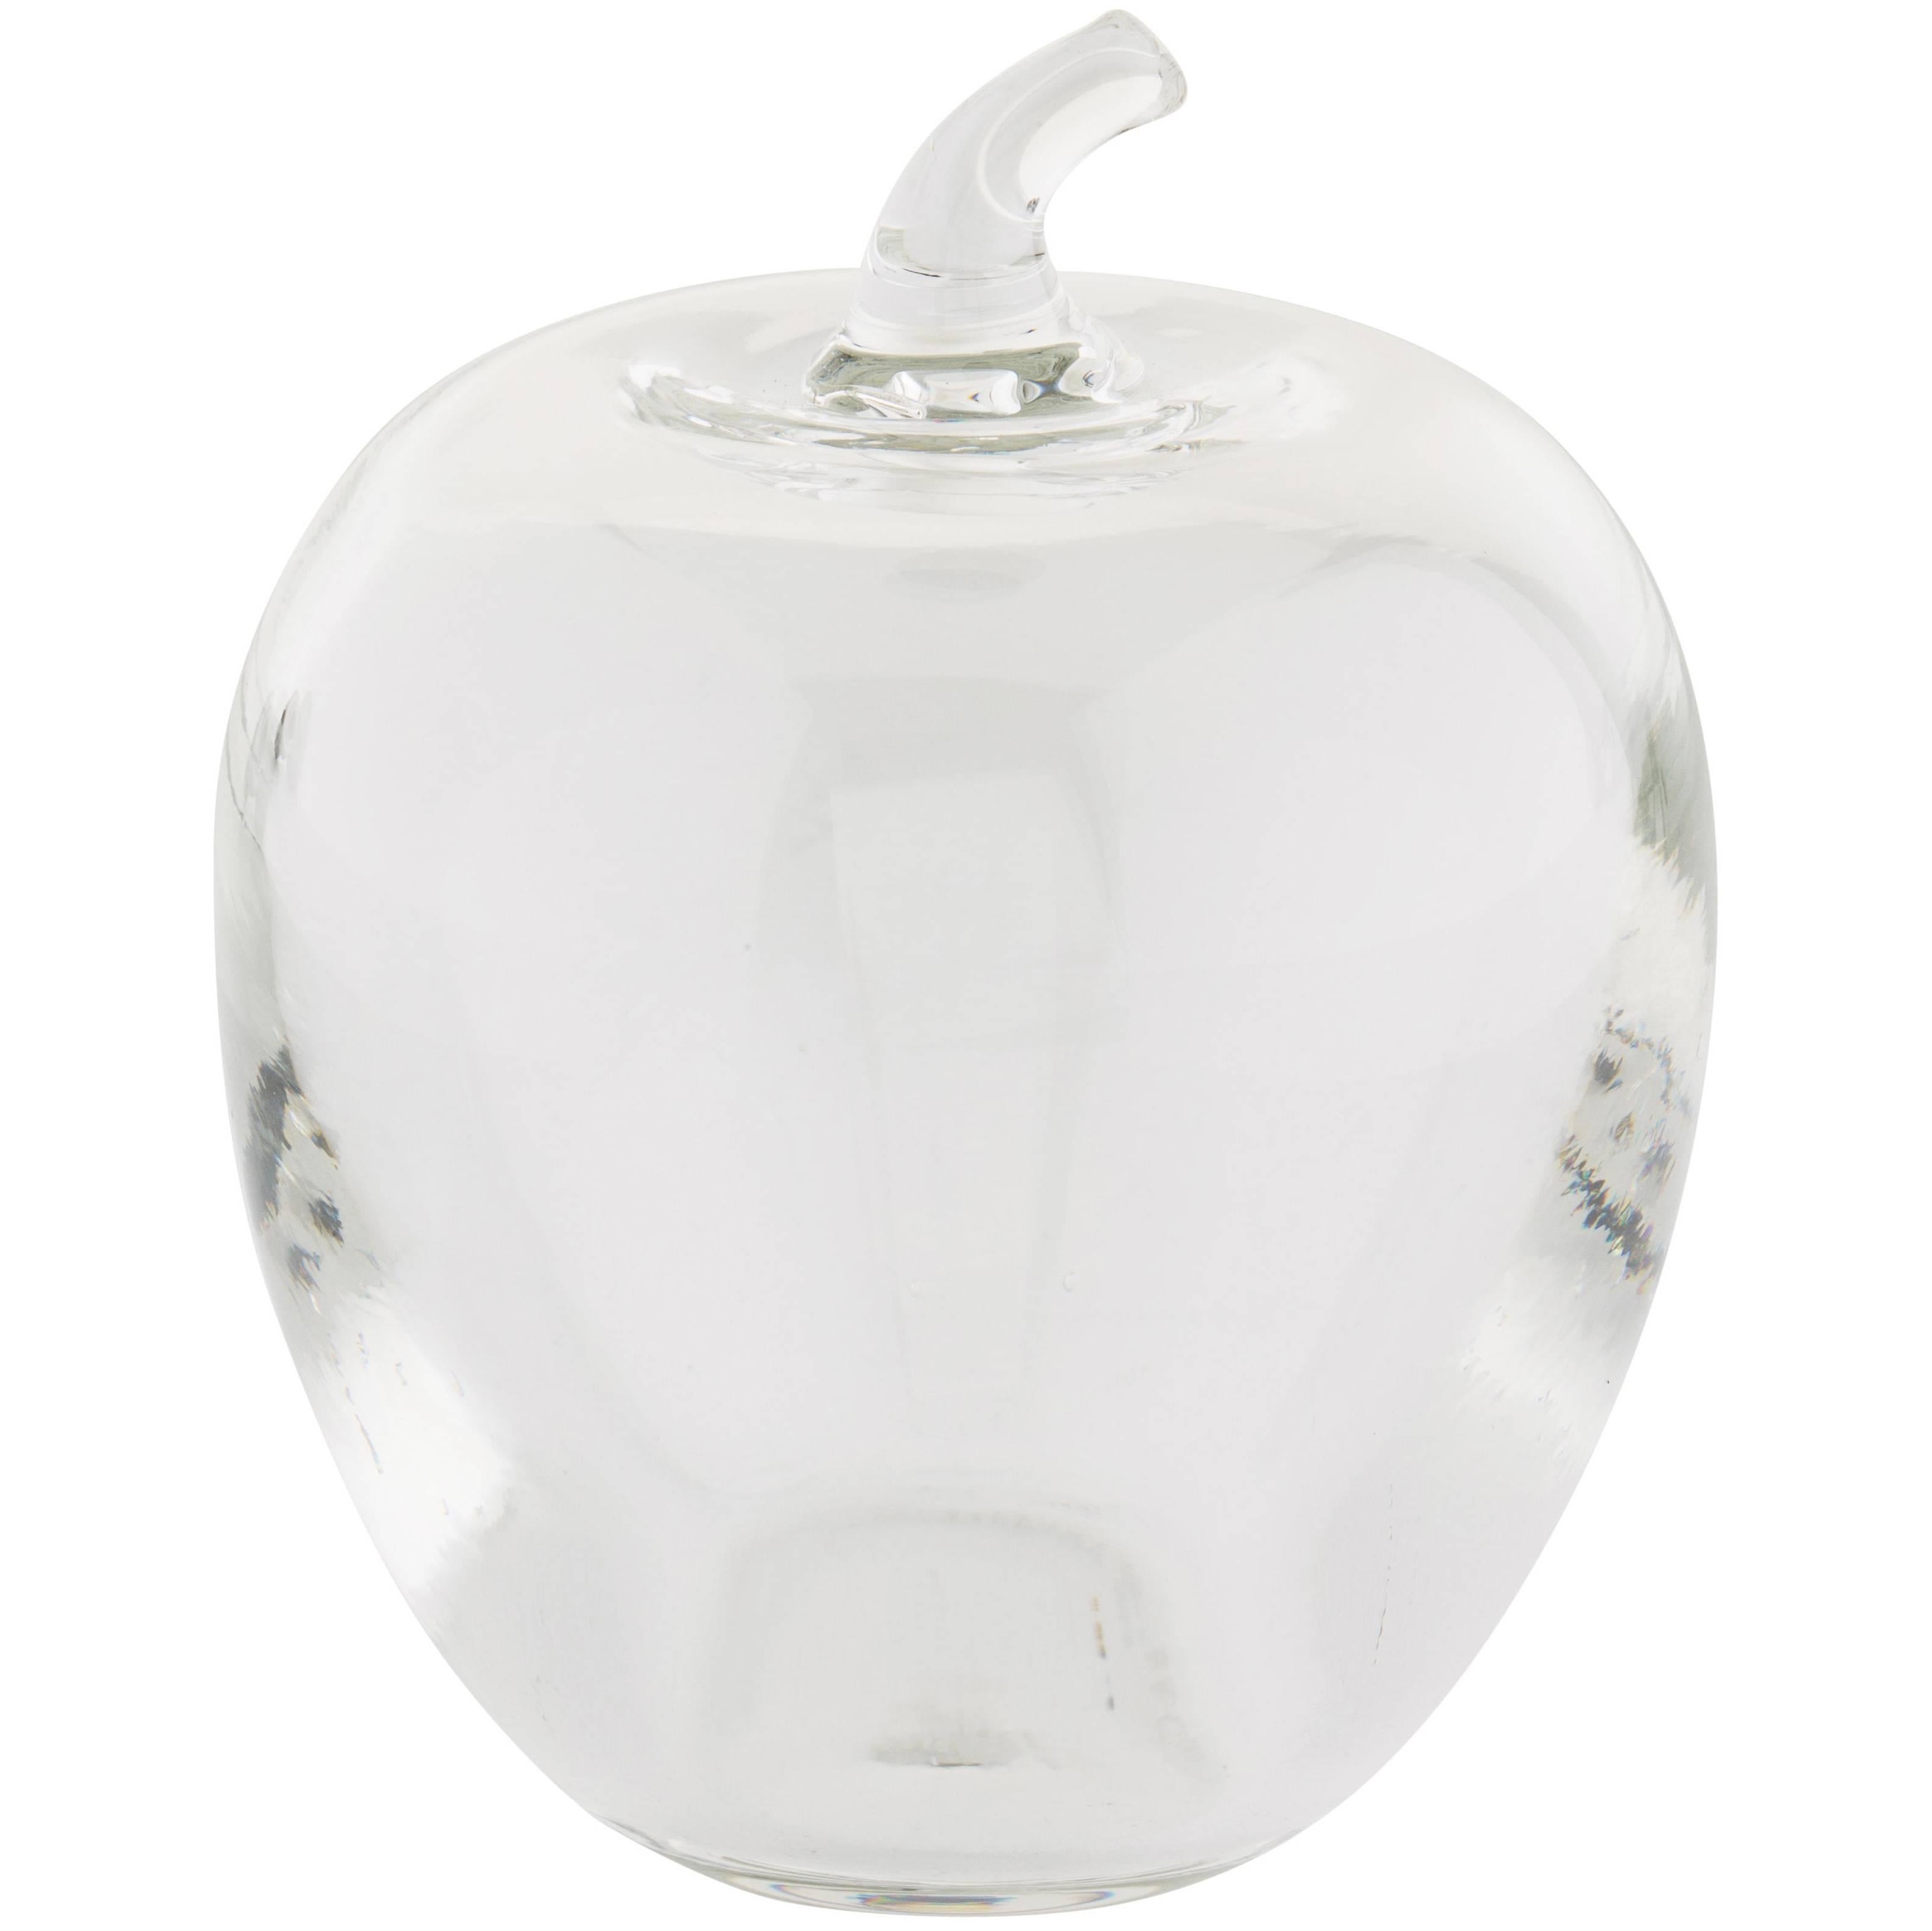 Tiffany & Co Like New Crystal Apple Home Decorative Desk Table Paperweight 